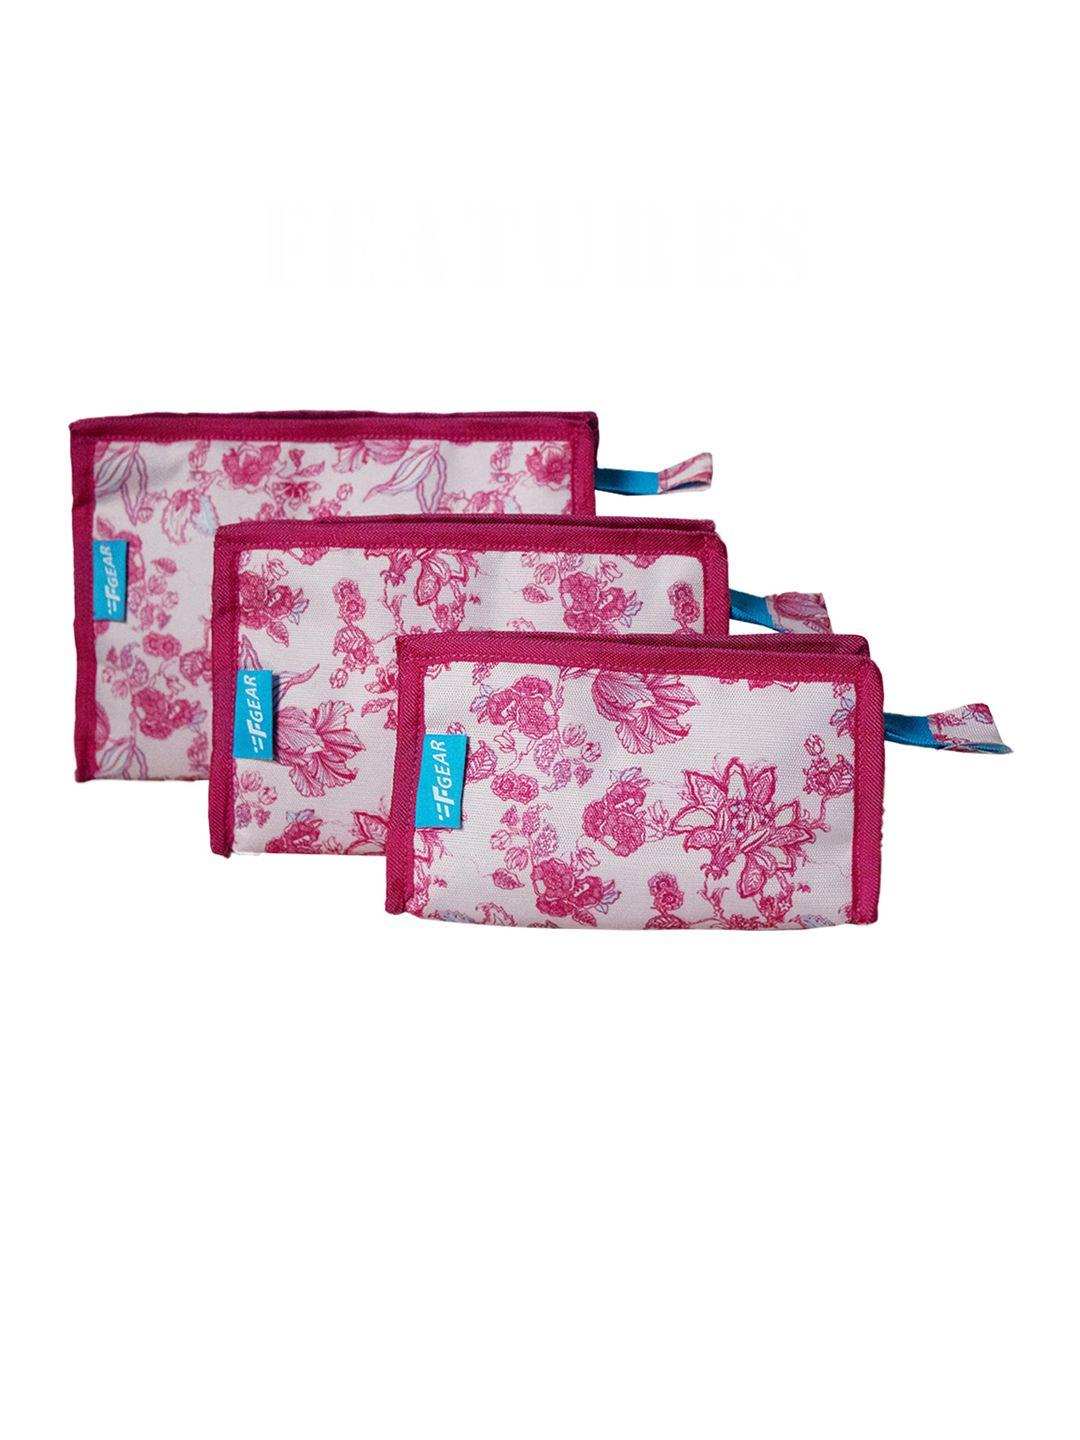 f gear set of 3 white & pink printed travel pouch